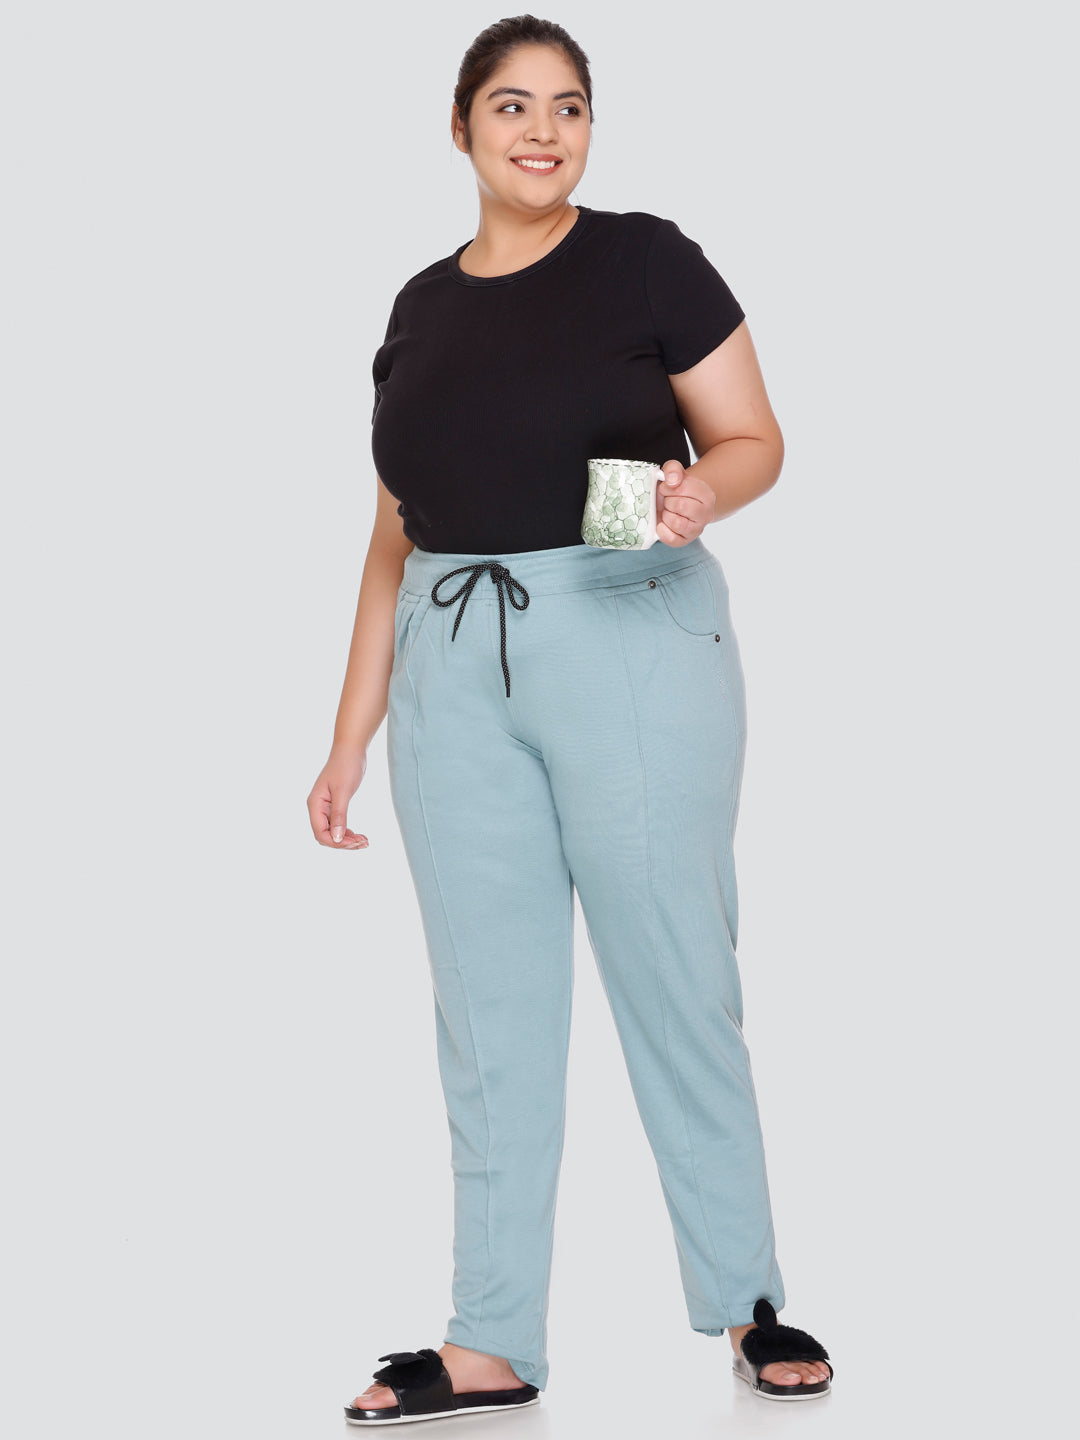 Comfy Sage Relaxed Fit Cotton Trackpants for Women online in India at best prices